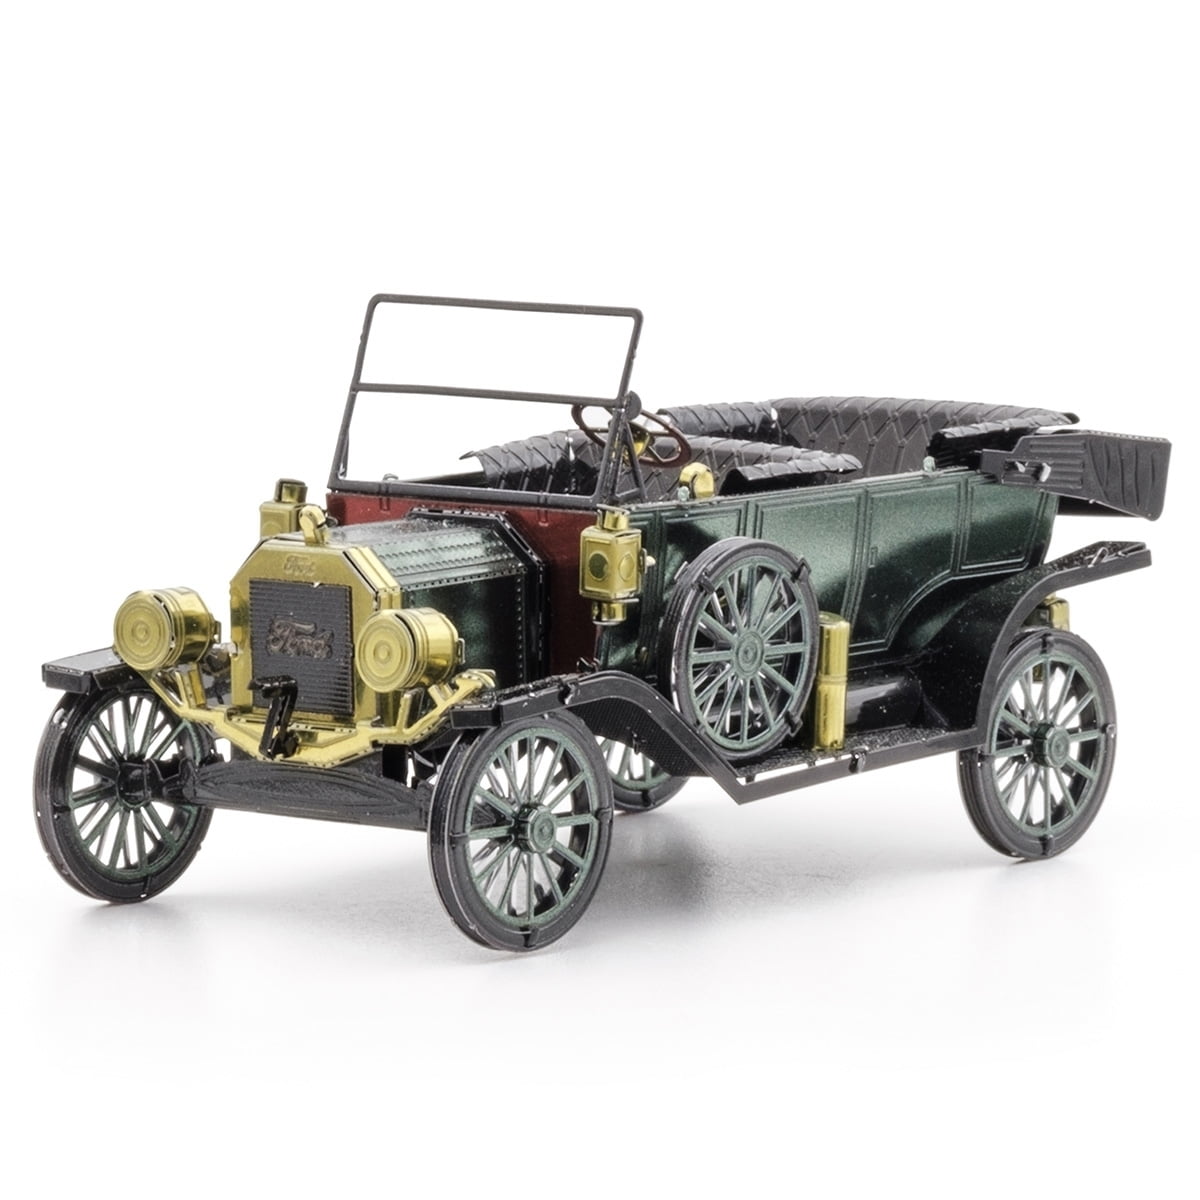 Ford Model T Car 3D Puzzle Ford T 1908 Jigsaw Model Birthday Gift 